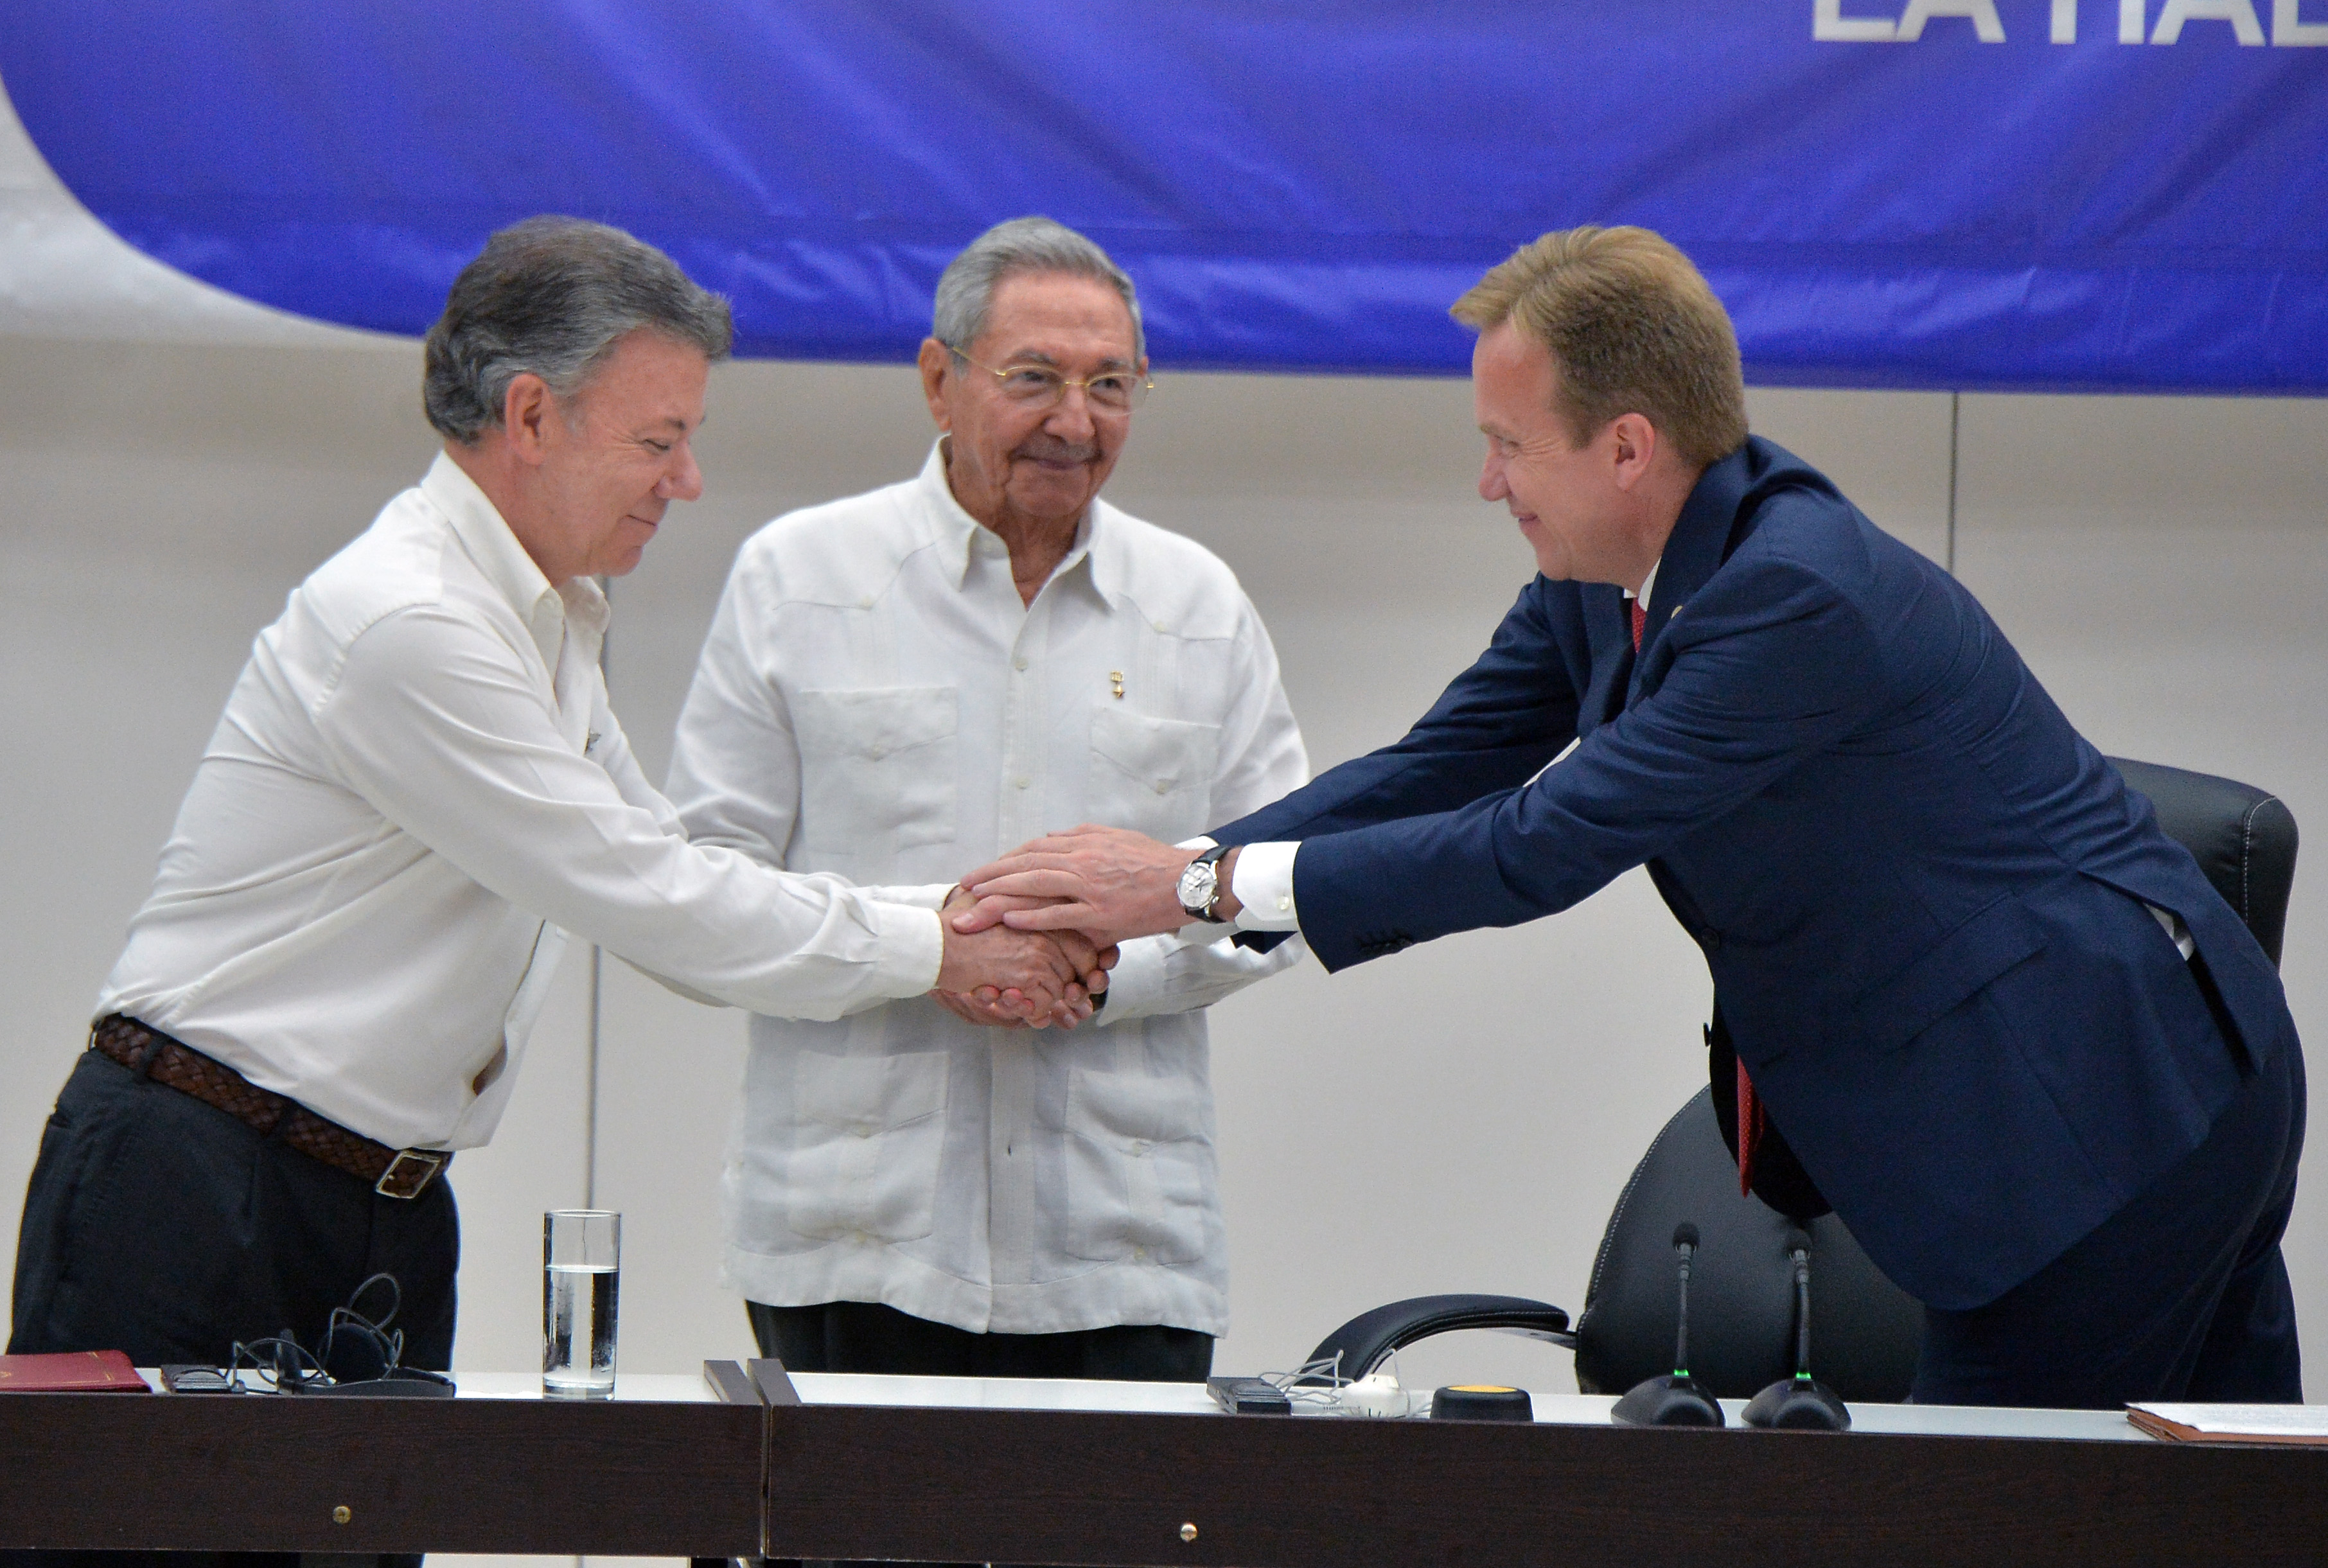 Colombia's President Juan Manuel Santos (L) shakes hands with Norway's Foreign Minister Borge Brende, as Cuban President Raul Castro (C) looks on during the signing of the ceasefire between the Colombian government and the FARC guerrilla, in Havana on June 23, 2016. Colombia's government and the FARC guerrilla force signed a definitive ceasefire Thursday, taking one of the last crucial steps toward ending Latin America's longest civil war. / AFP PHOTO / ADALBERTO ROQUE